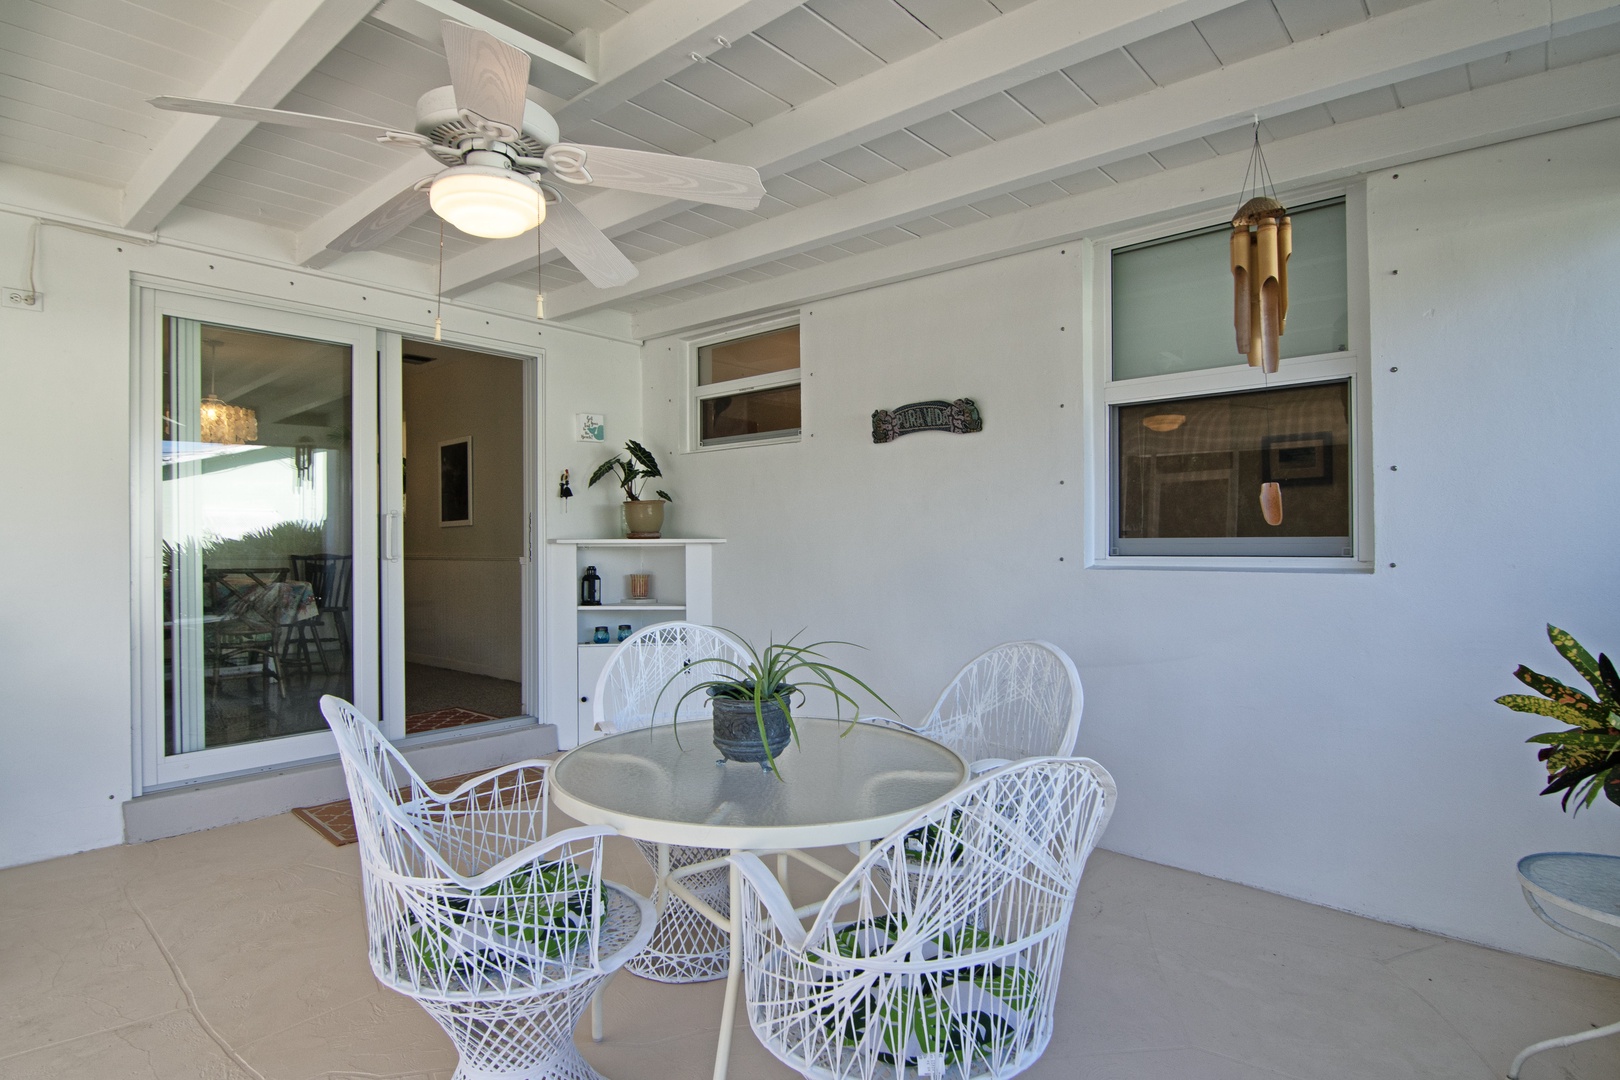 Dine alfresco or lounge the day away in the shaded lanai